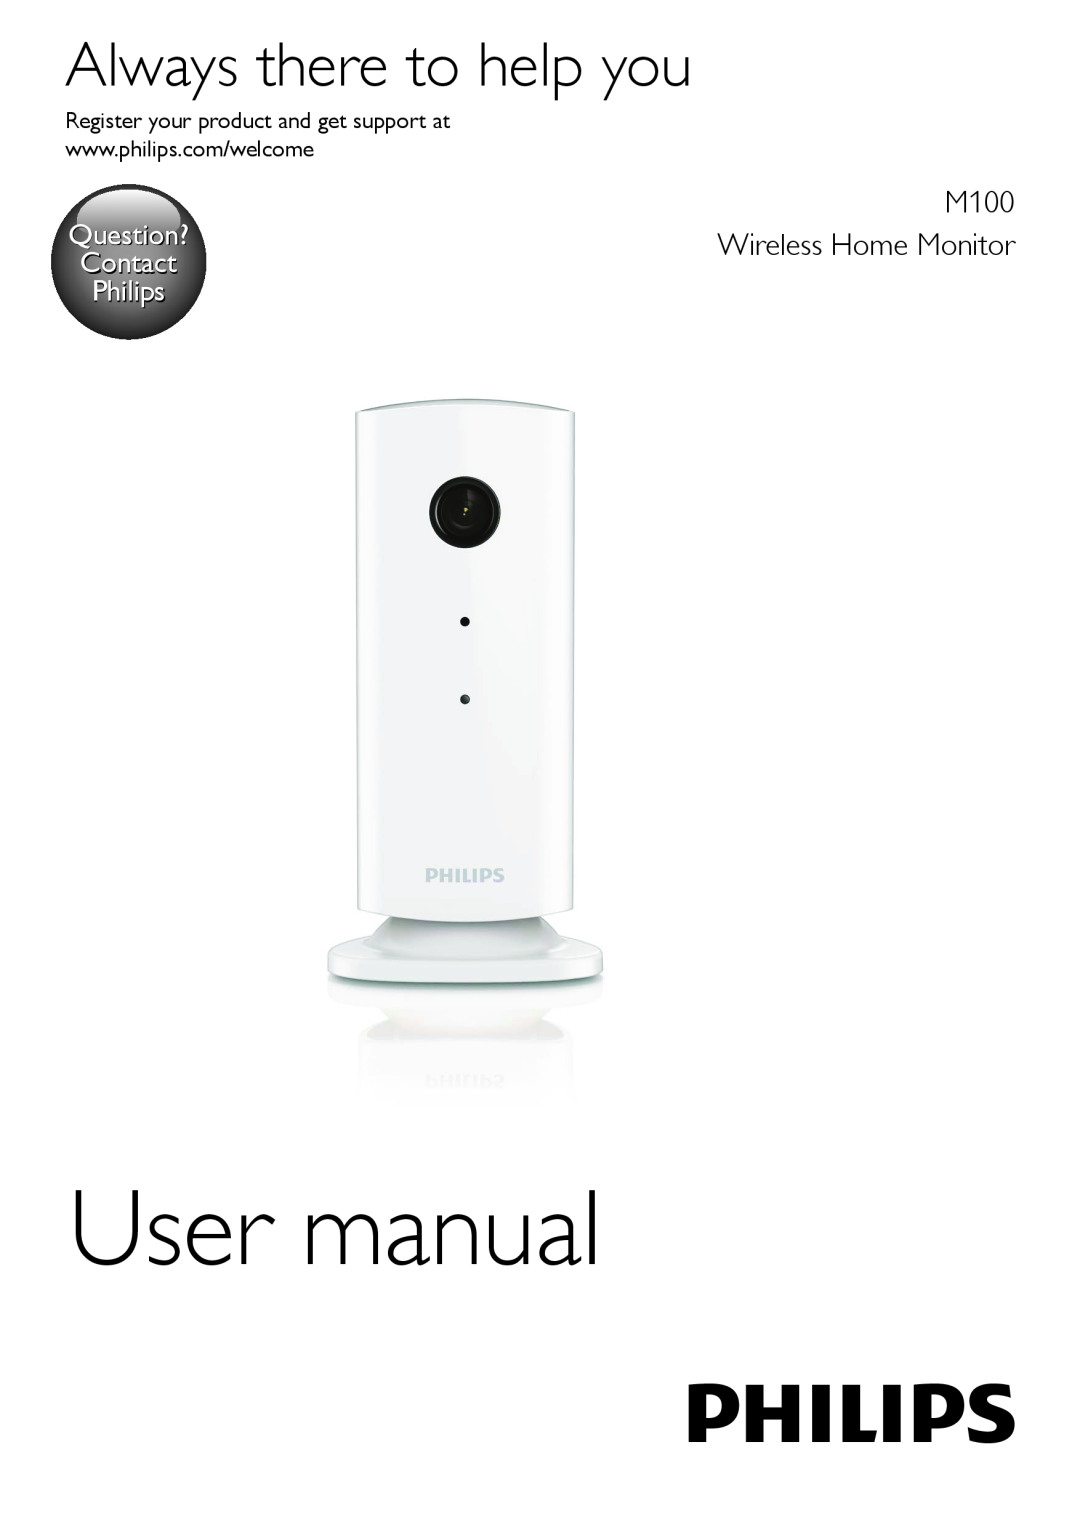 Philips M100 user manual Always there to help you, Wireless Home Monitor, Contact, Question?, Philips 